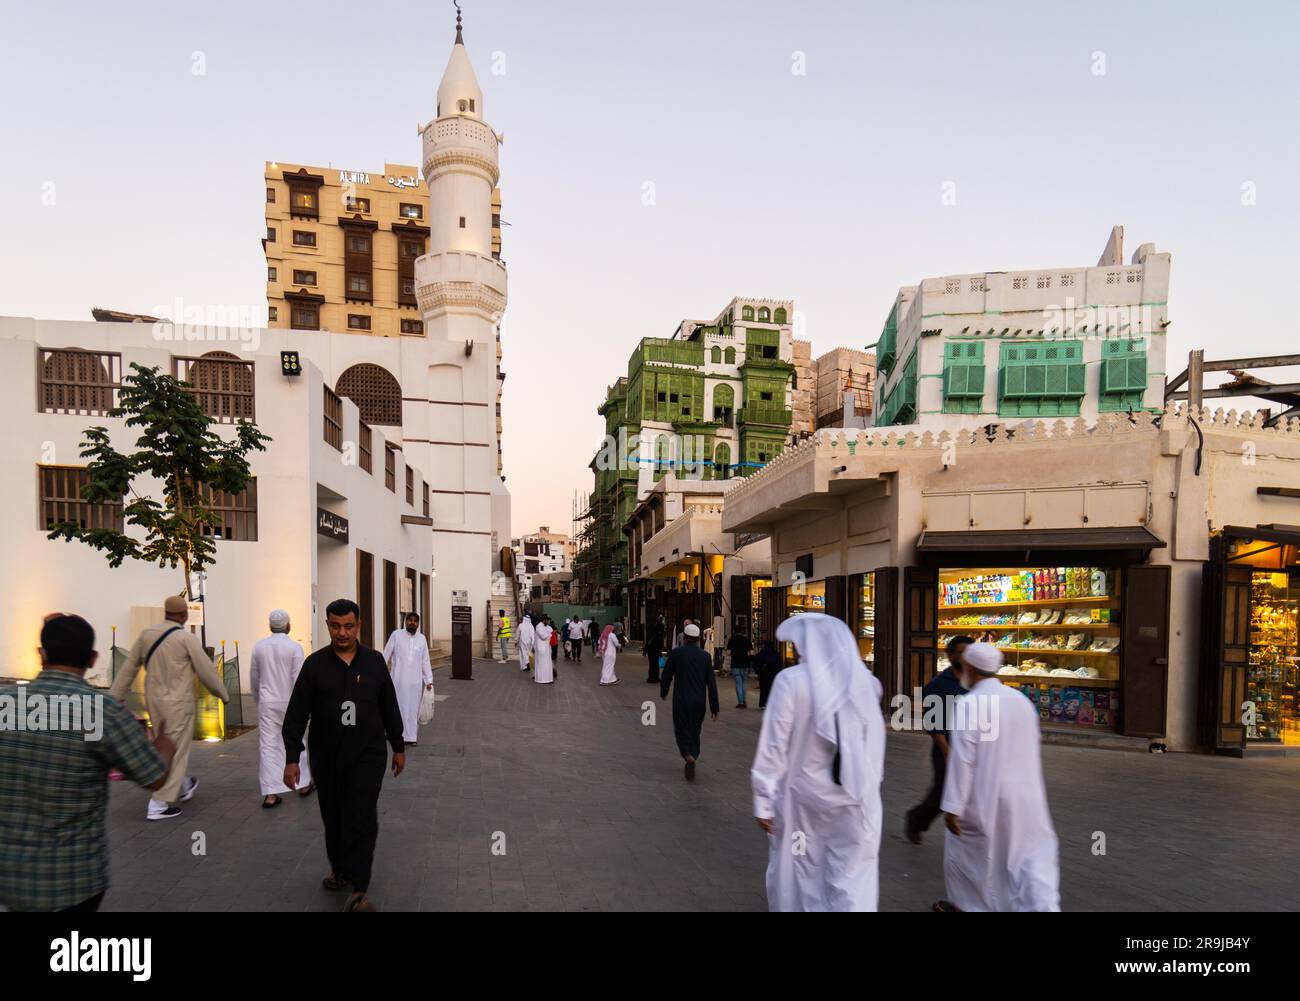 Jeddah, Saudi Arabia - People dressed in traditional cloth walk in front of the Al Ma'amar Mosque in Jeddah old town of Al-Balad in Saudi Arabia Stock Photo